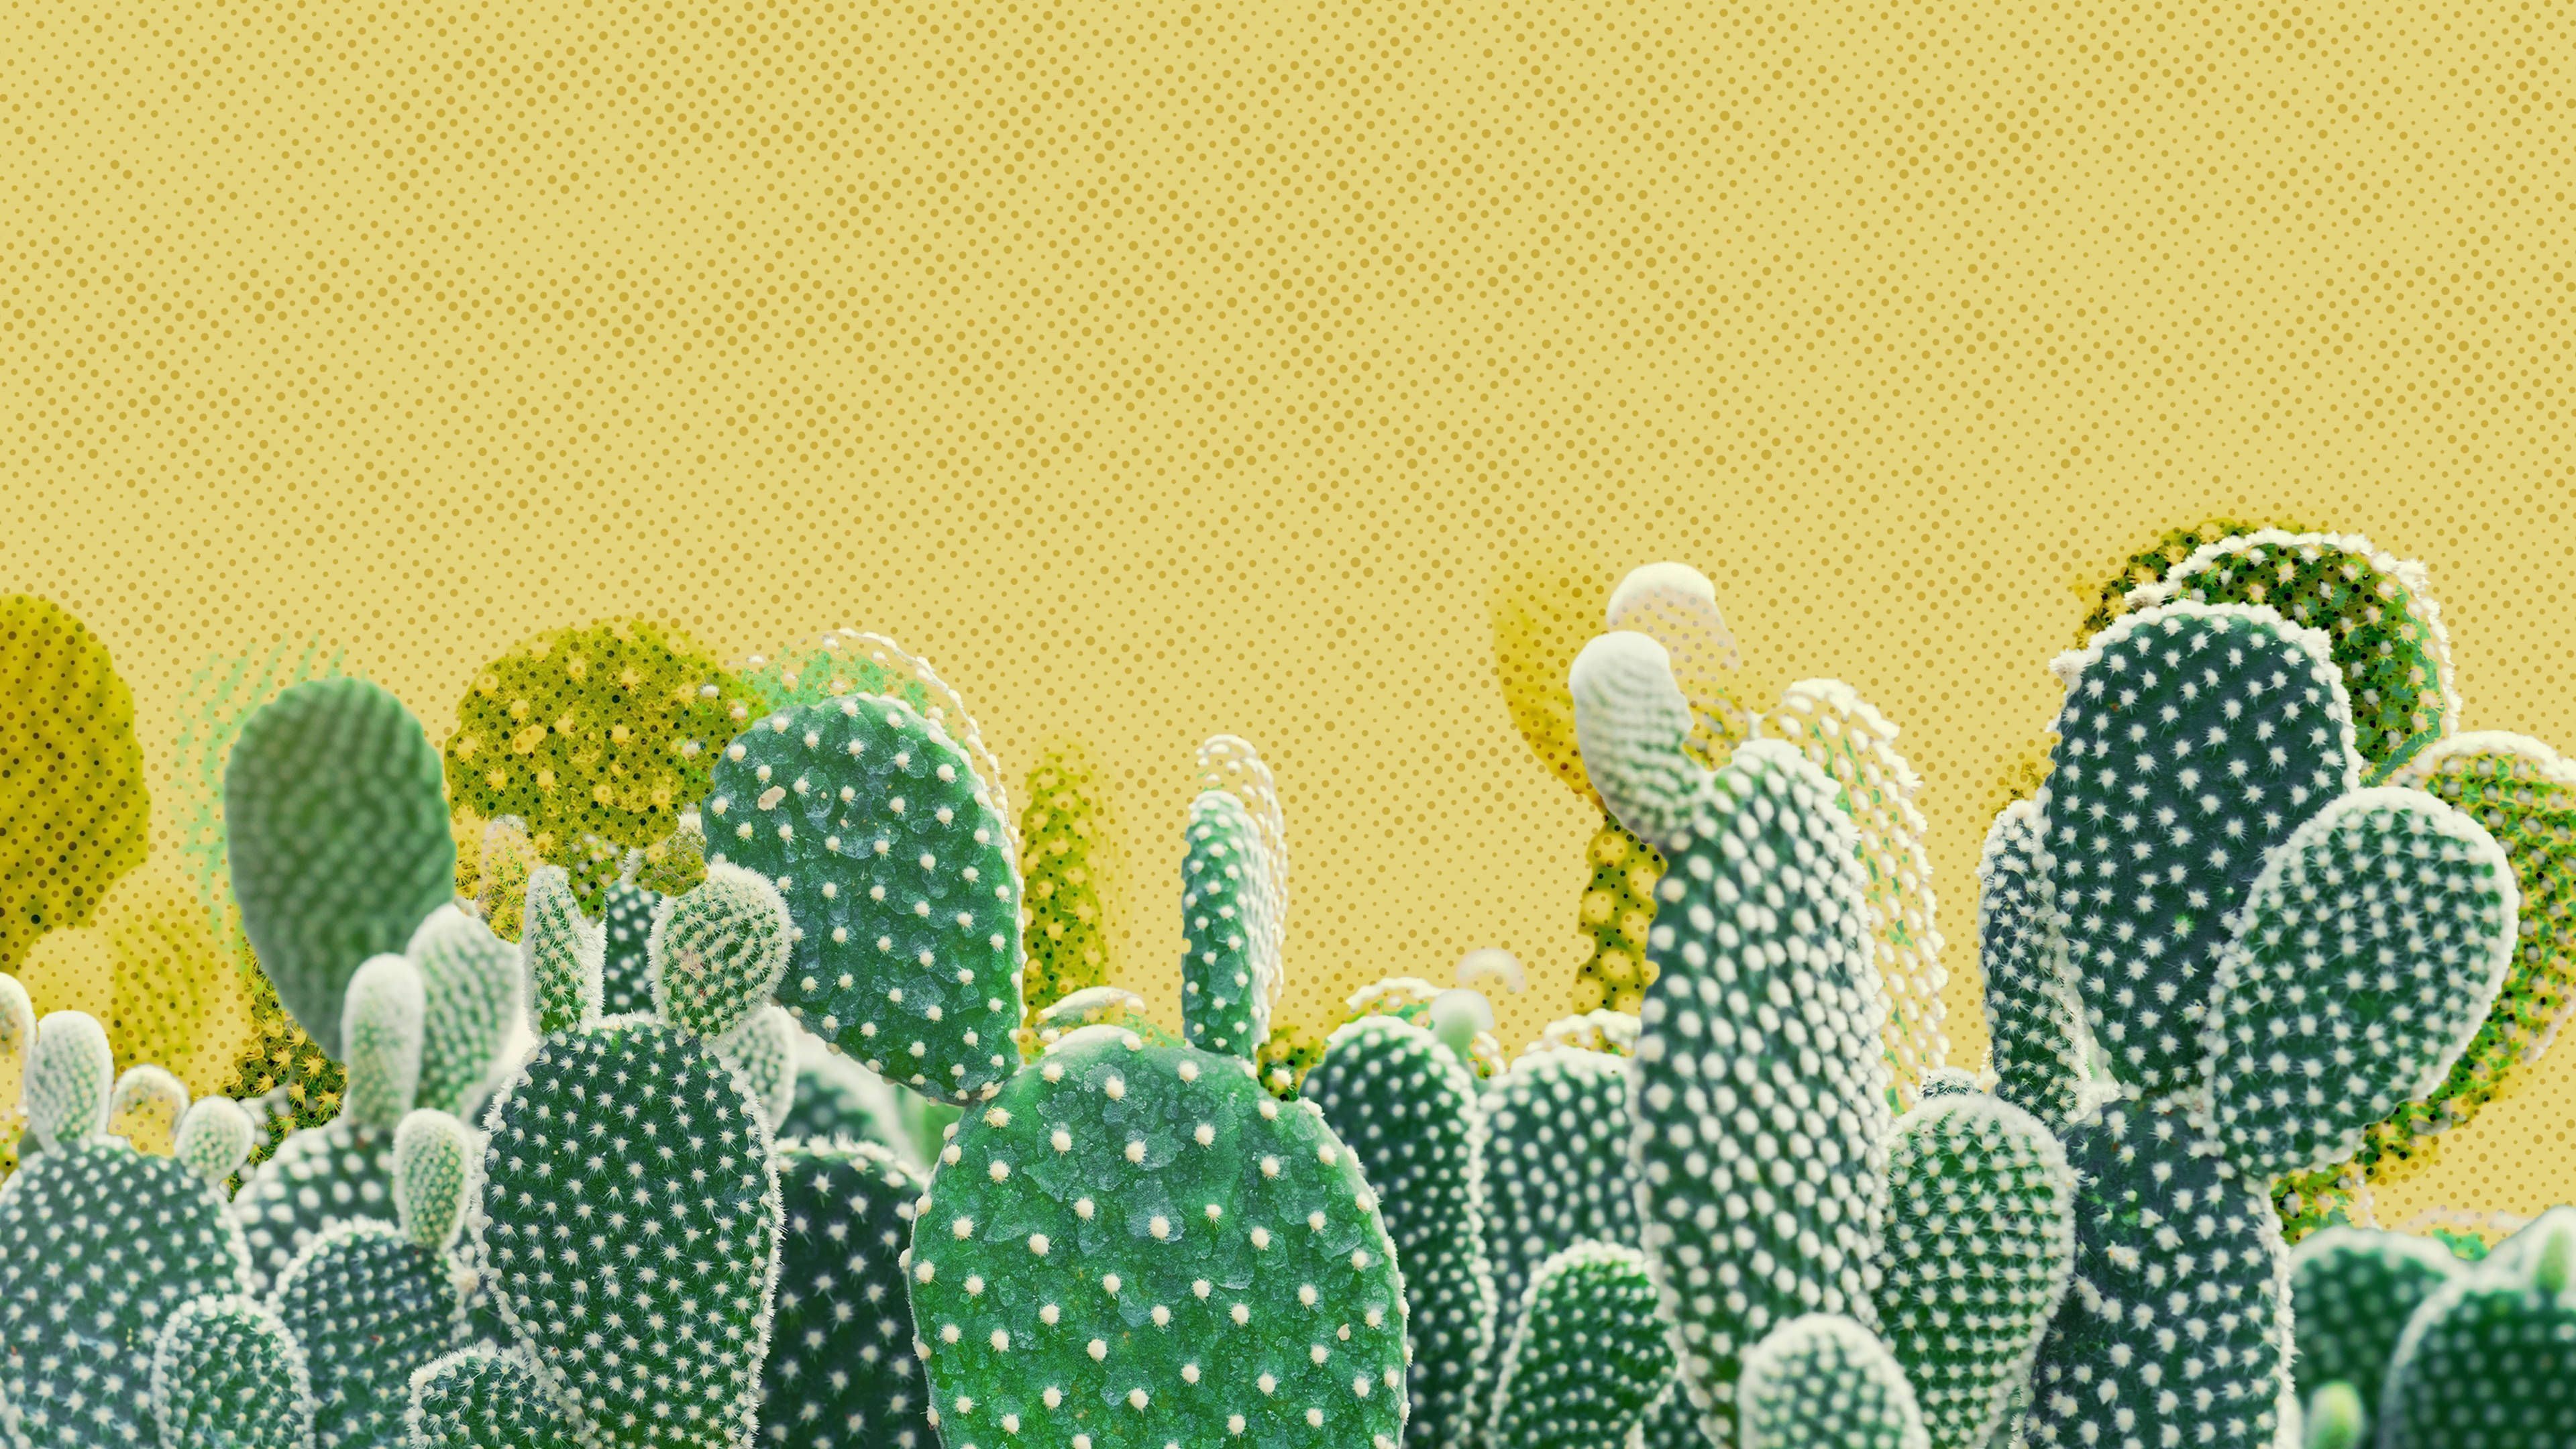 A cactus plant with yellow background - Cactus, western